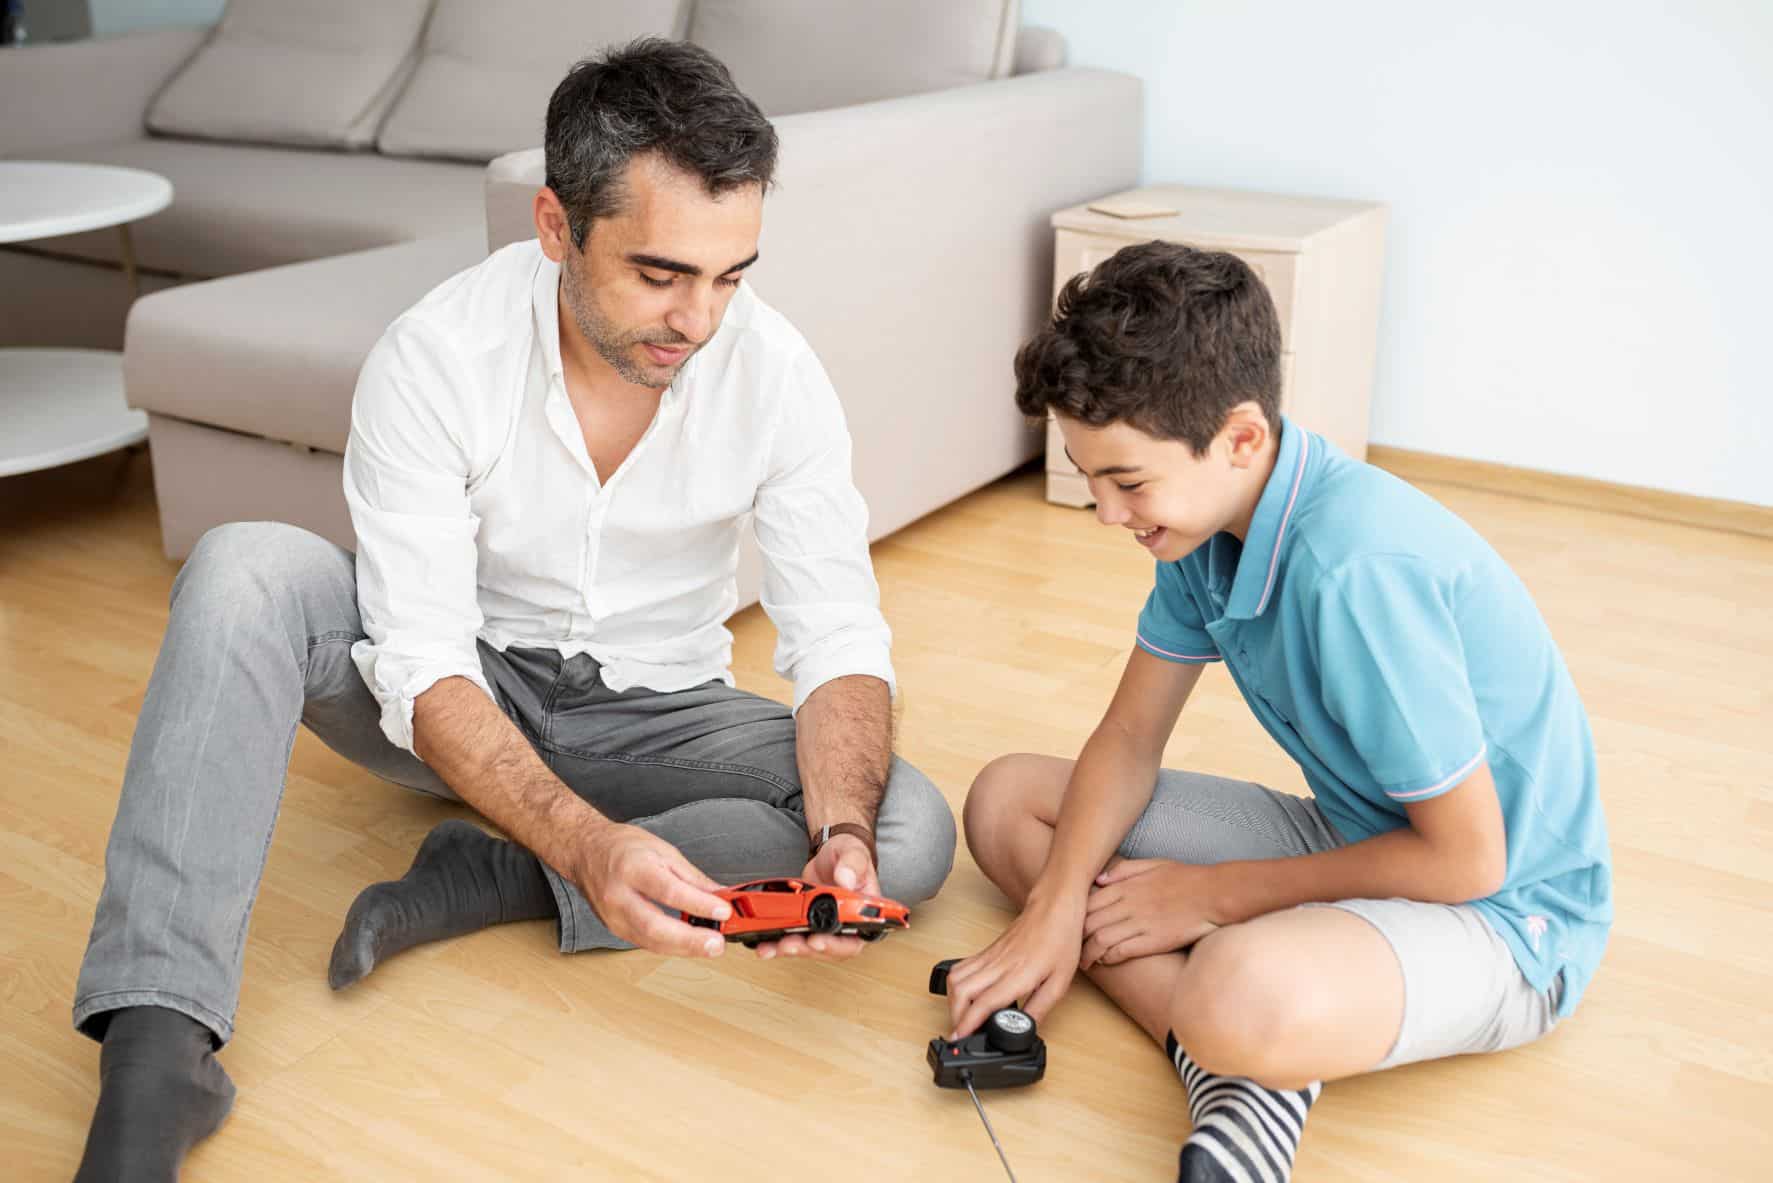 Explore the Excitement: Remote Control Toys for Kids